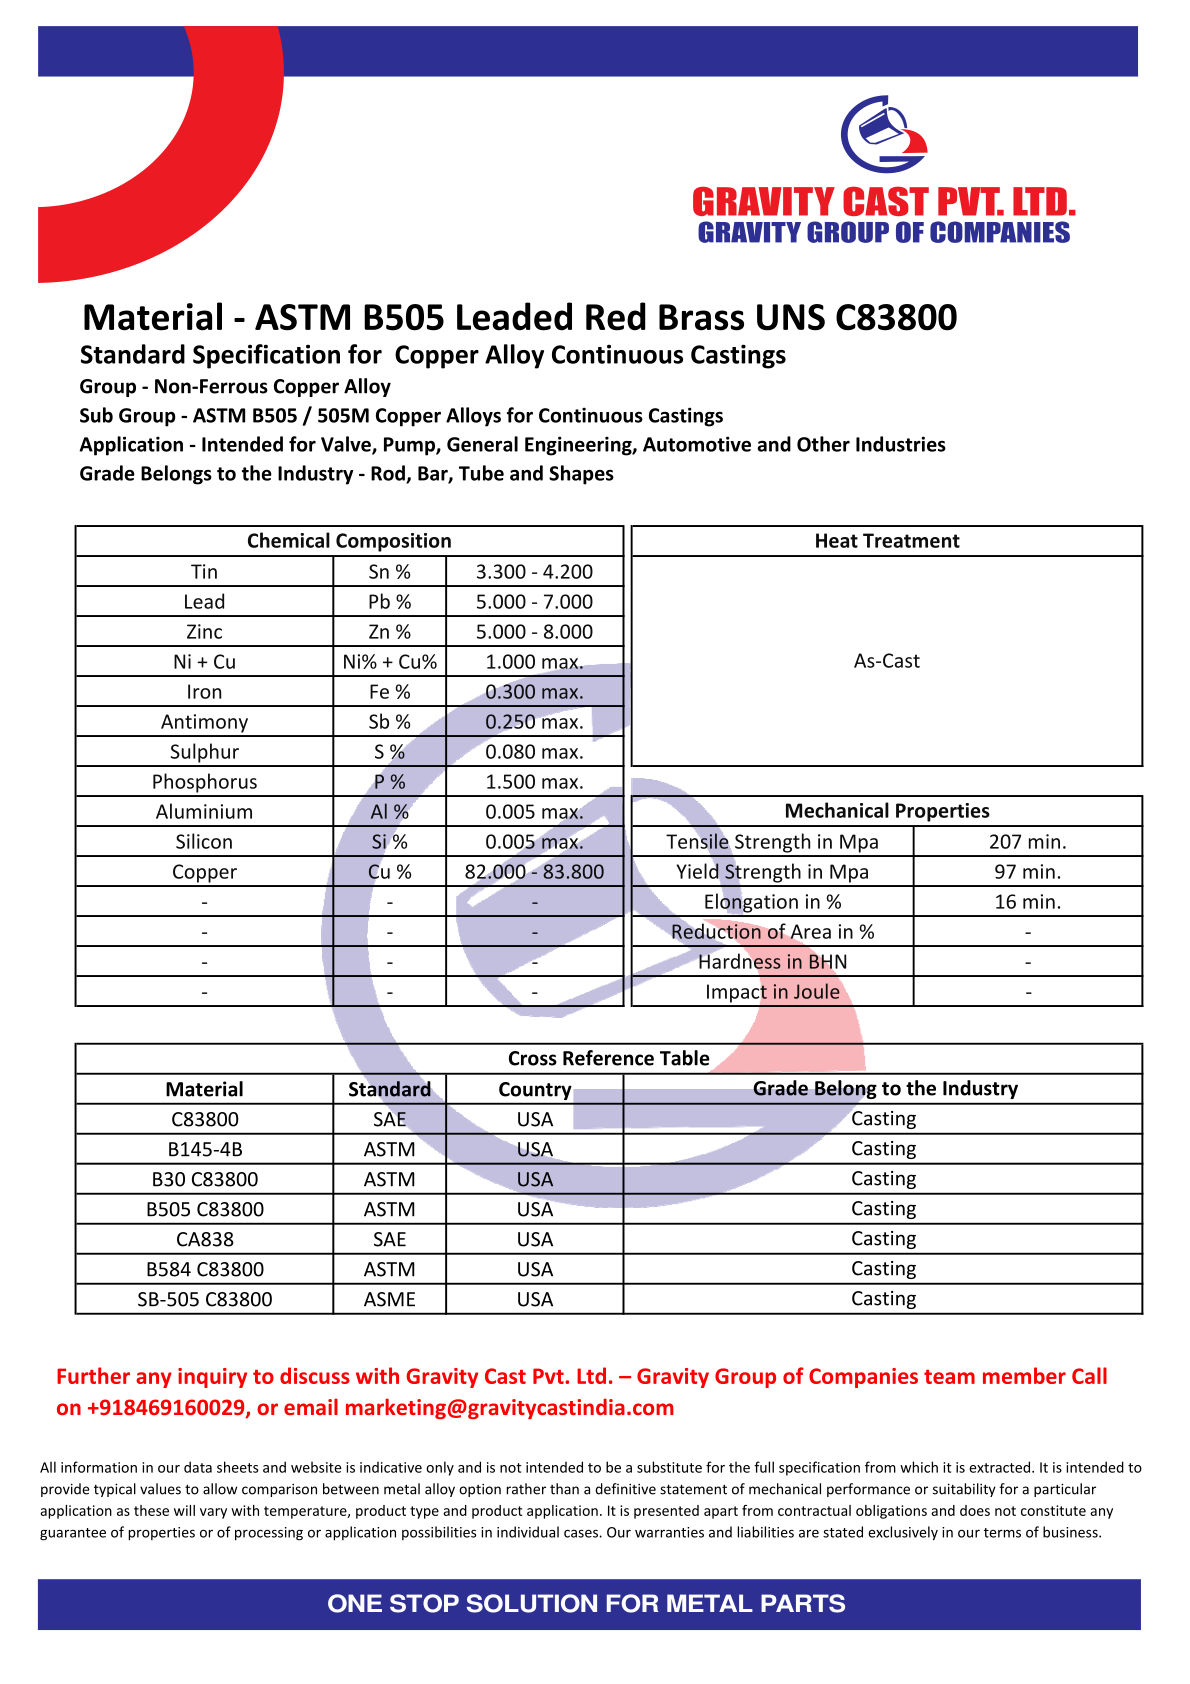 ASTM B505 Leaded Red Brass UNS C83800.pdf